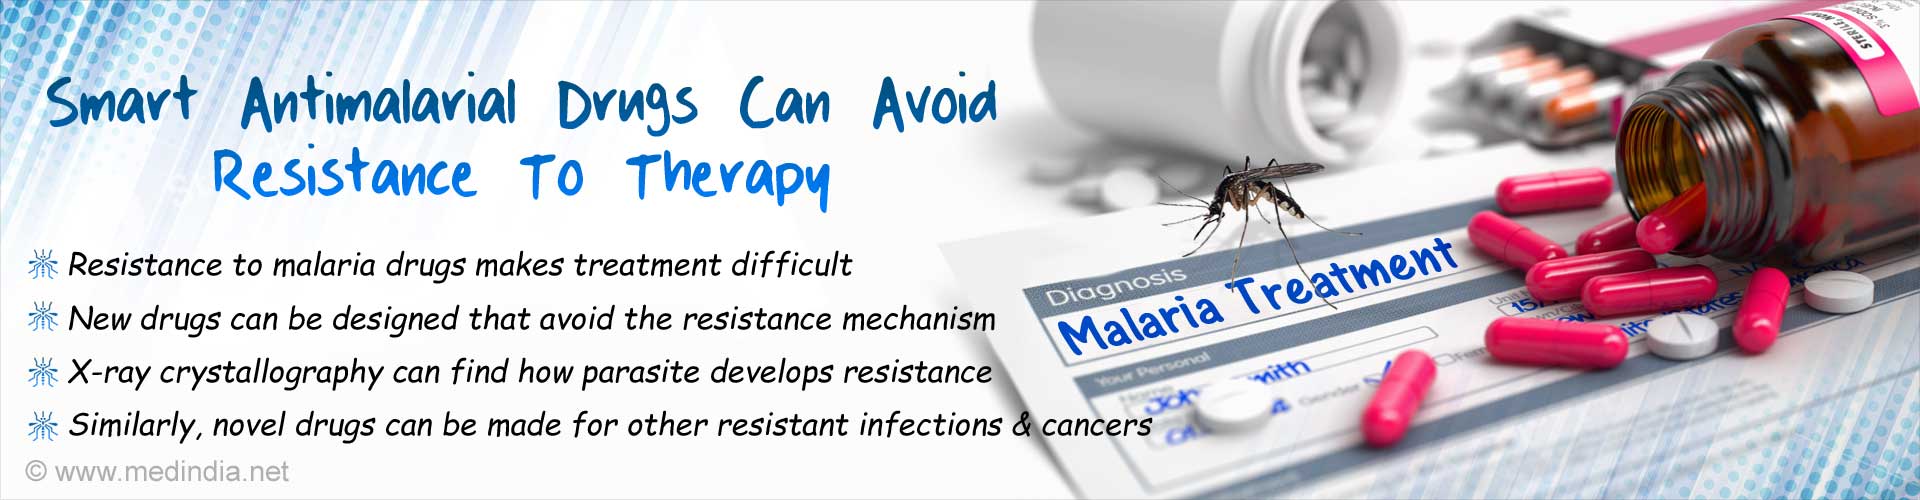 Smart antimalarial drugs can avoid resistance to therapy. Resistance to malarial drugs makes treatment difficult. New drugs can be designed that avoid the resistance mechanism. X-ray crystallography can find how parasite develops resistance. Similarly, novel drugs can be made for other resistant infections and cancers.
